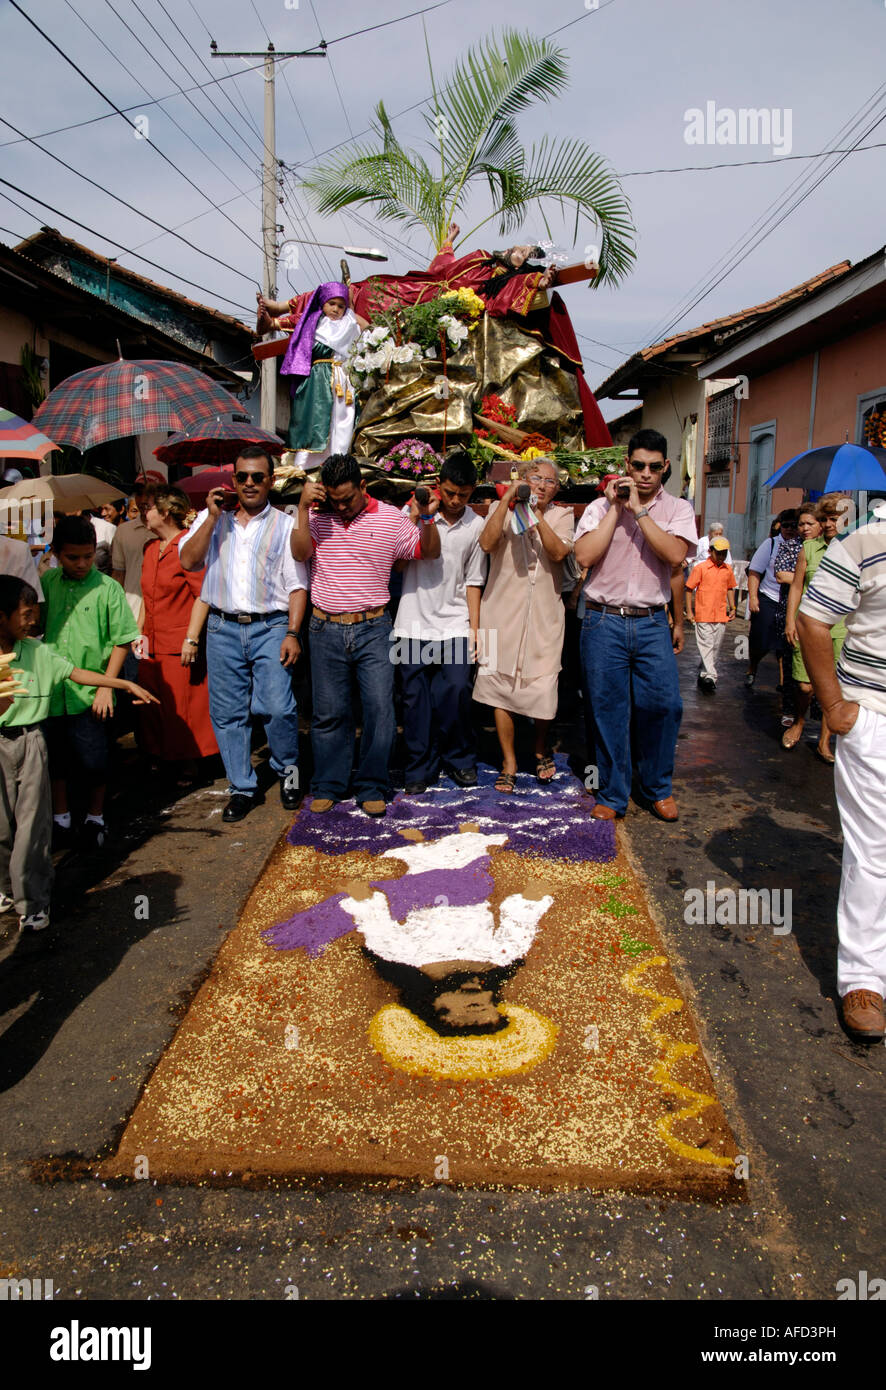 Devotees carry a model of the crucifiction over a sawdust carpet alfombra during a Semana Santa procession, Leon, Nicaragua Stock Photo